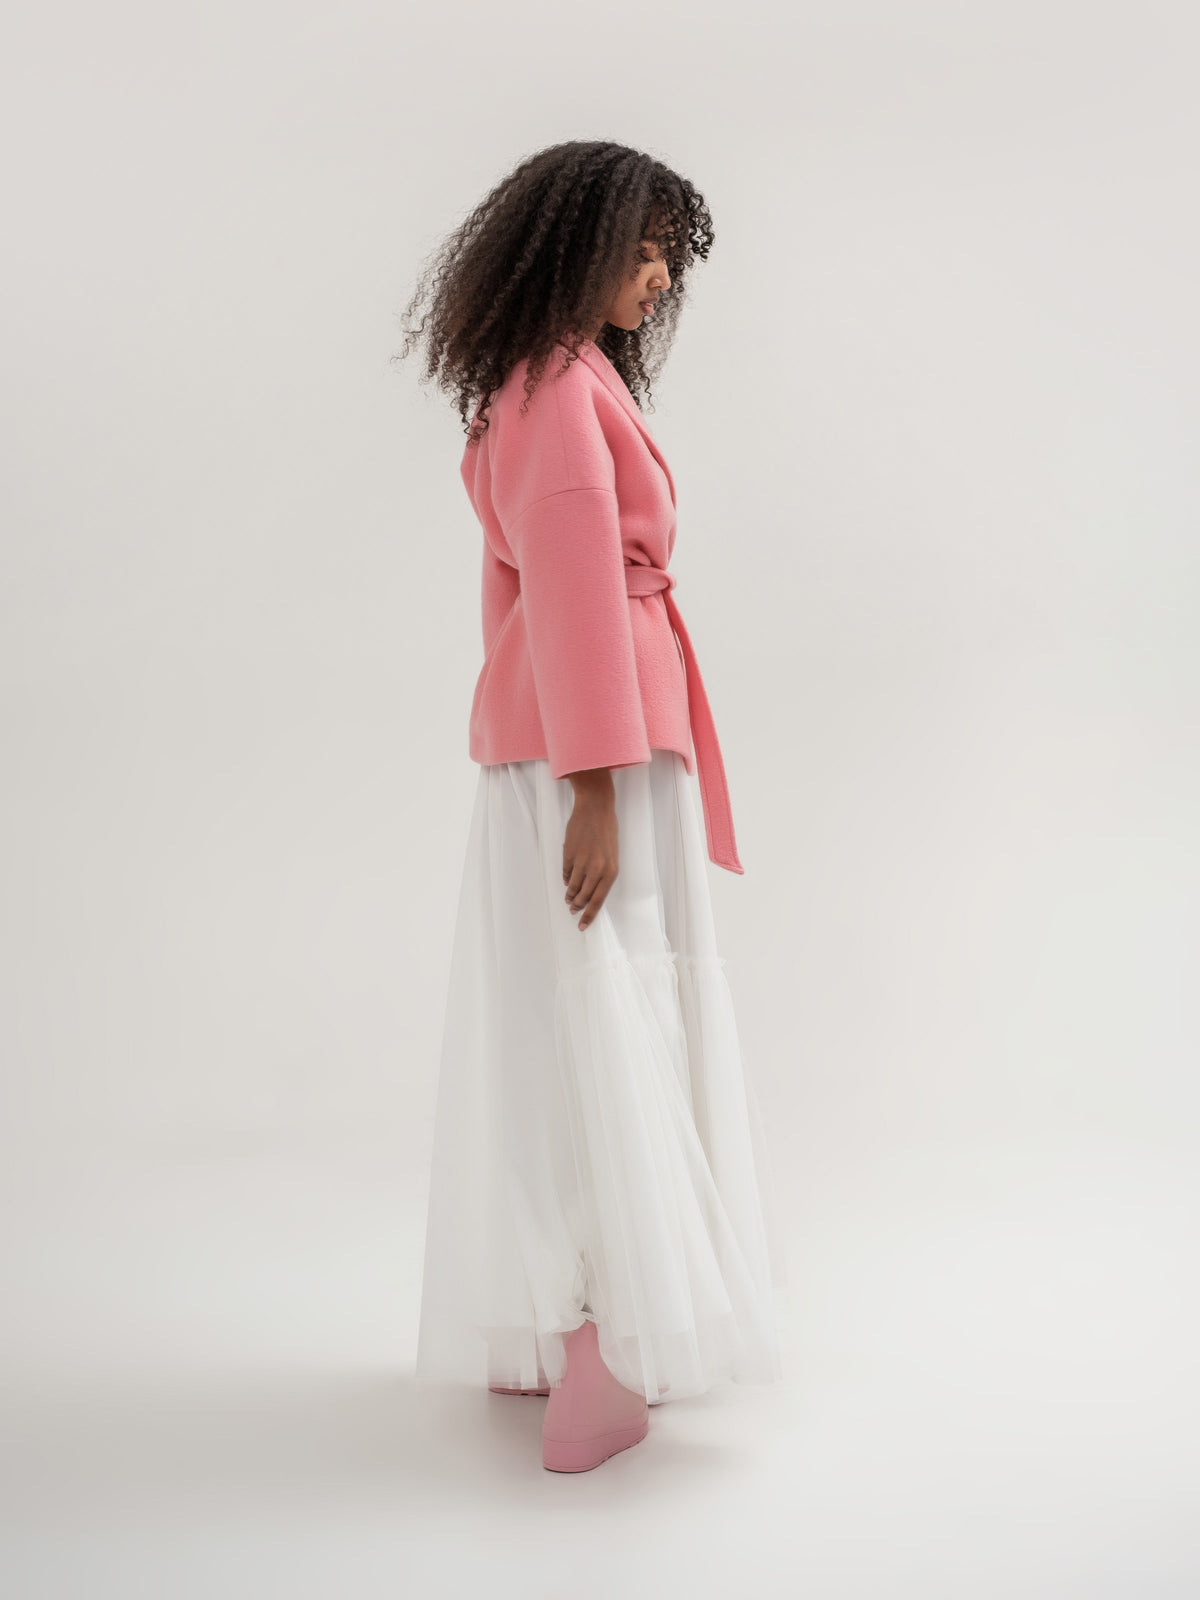 Coral coat and white tulle skirt